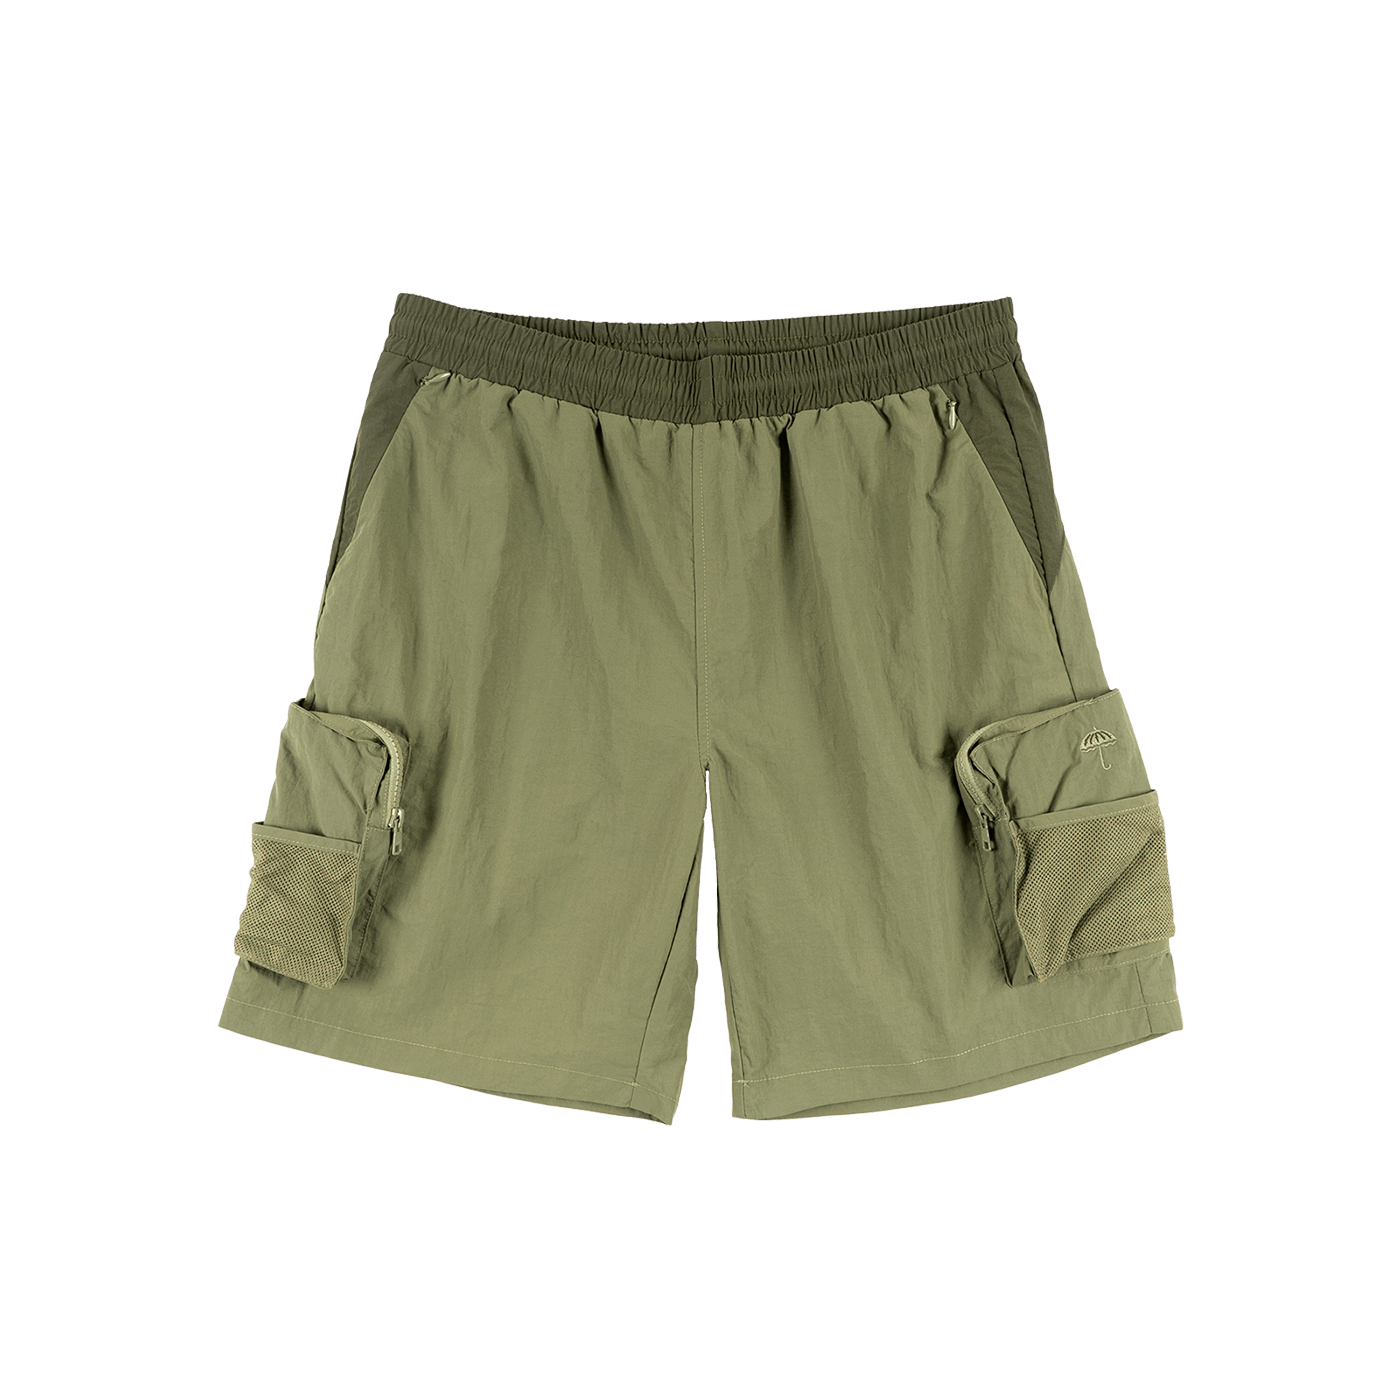 Hélas Limited Discovery Cargo Shorts KhakiHélas Limited Discovery Cargo Shorts Khaki